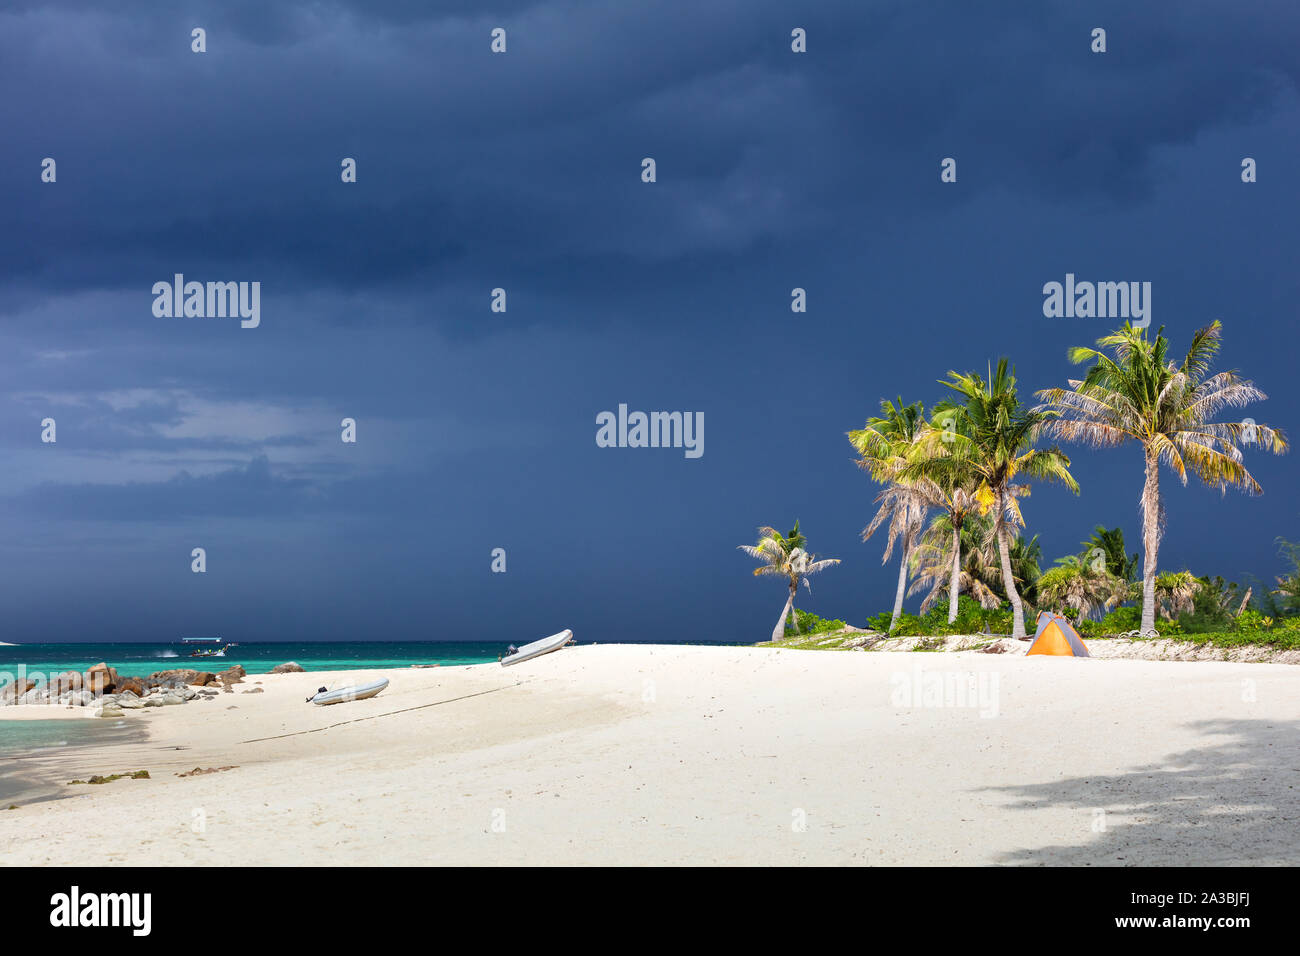 paradise beach in Thailand during storm with tall palms Stock Photo